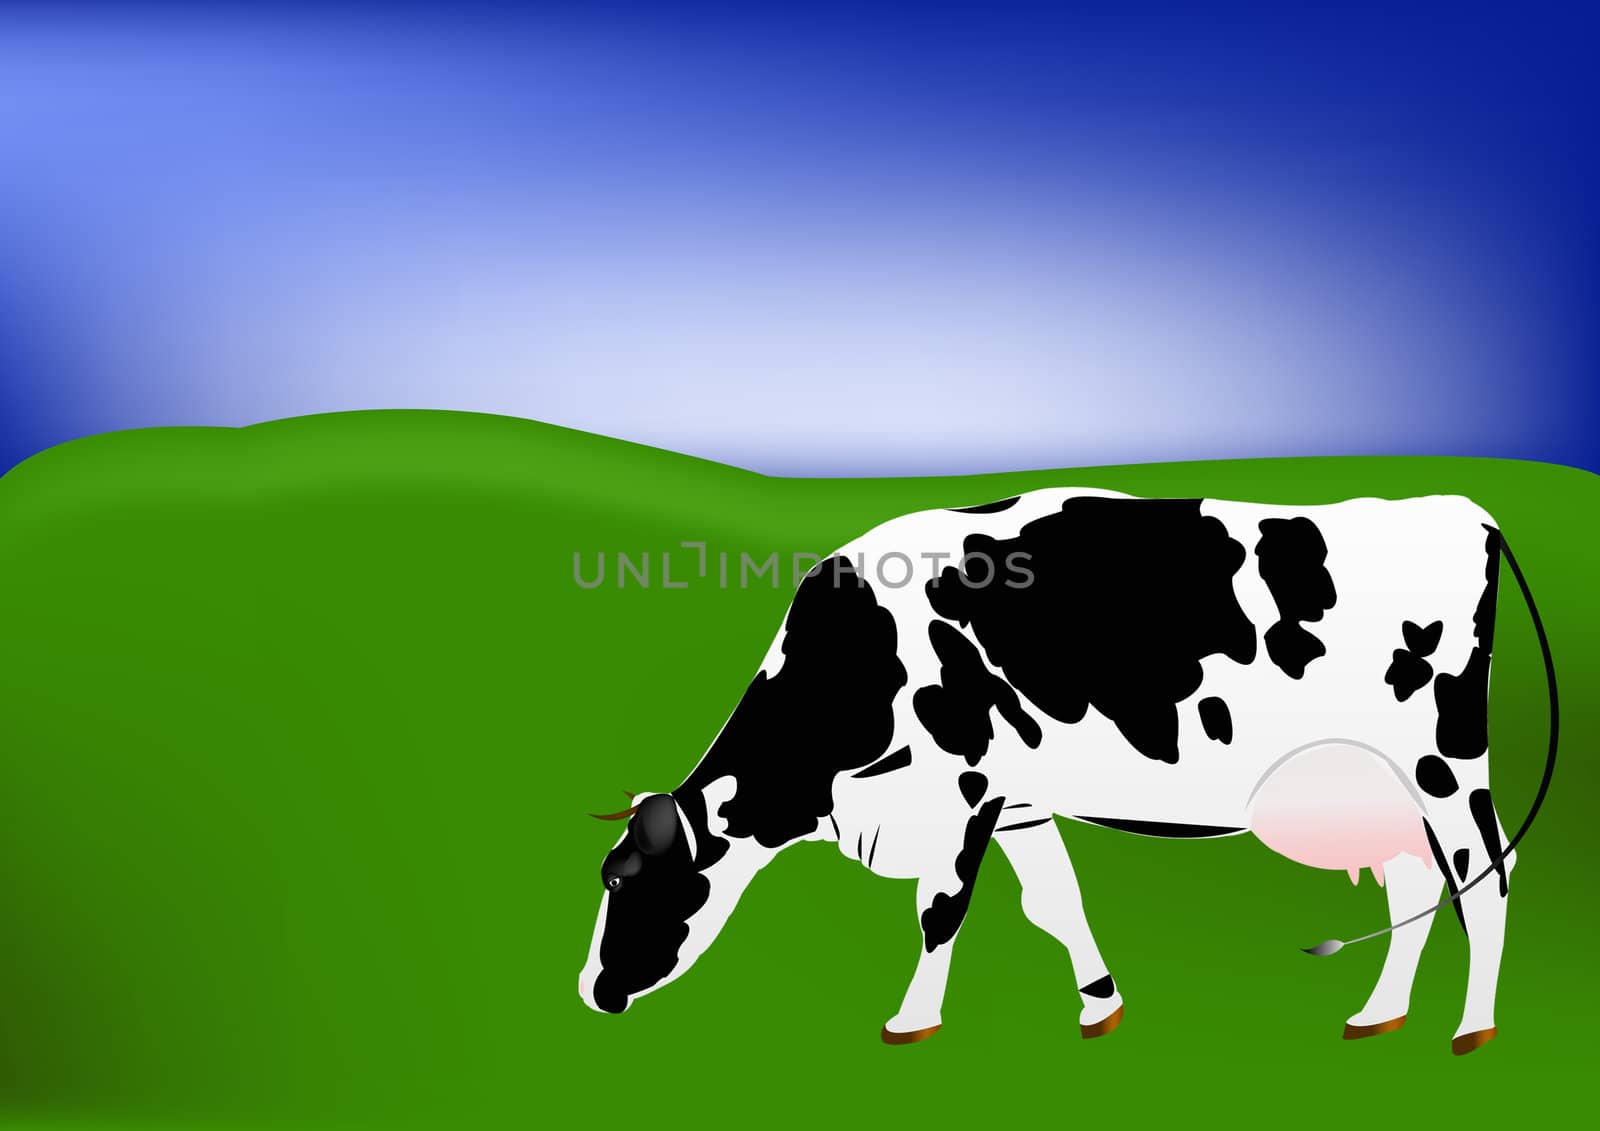 The cow of dairy breed is grazed on a green summer meadow